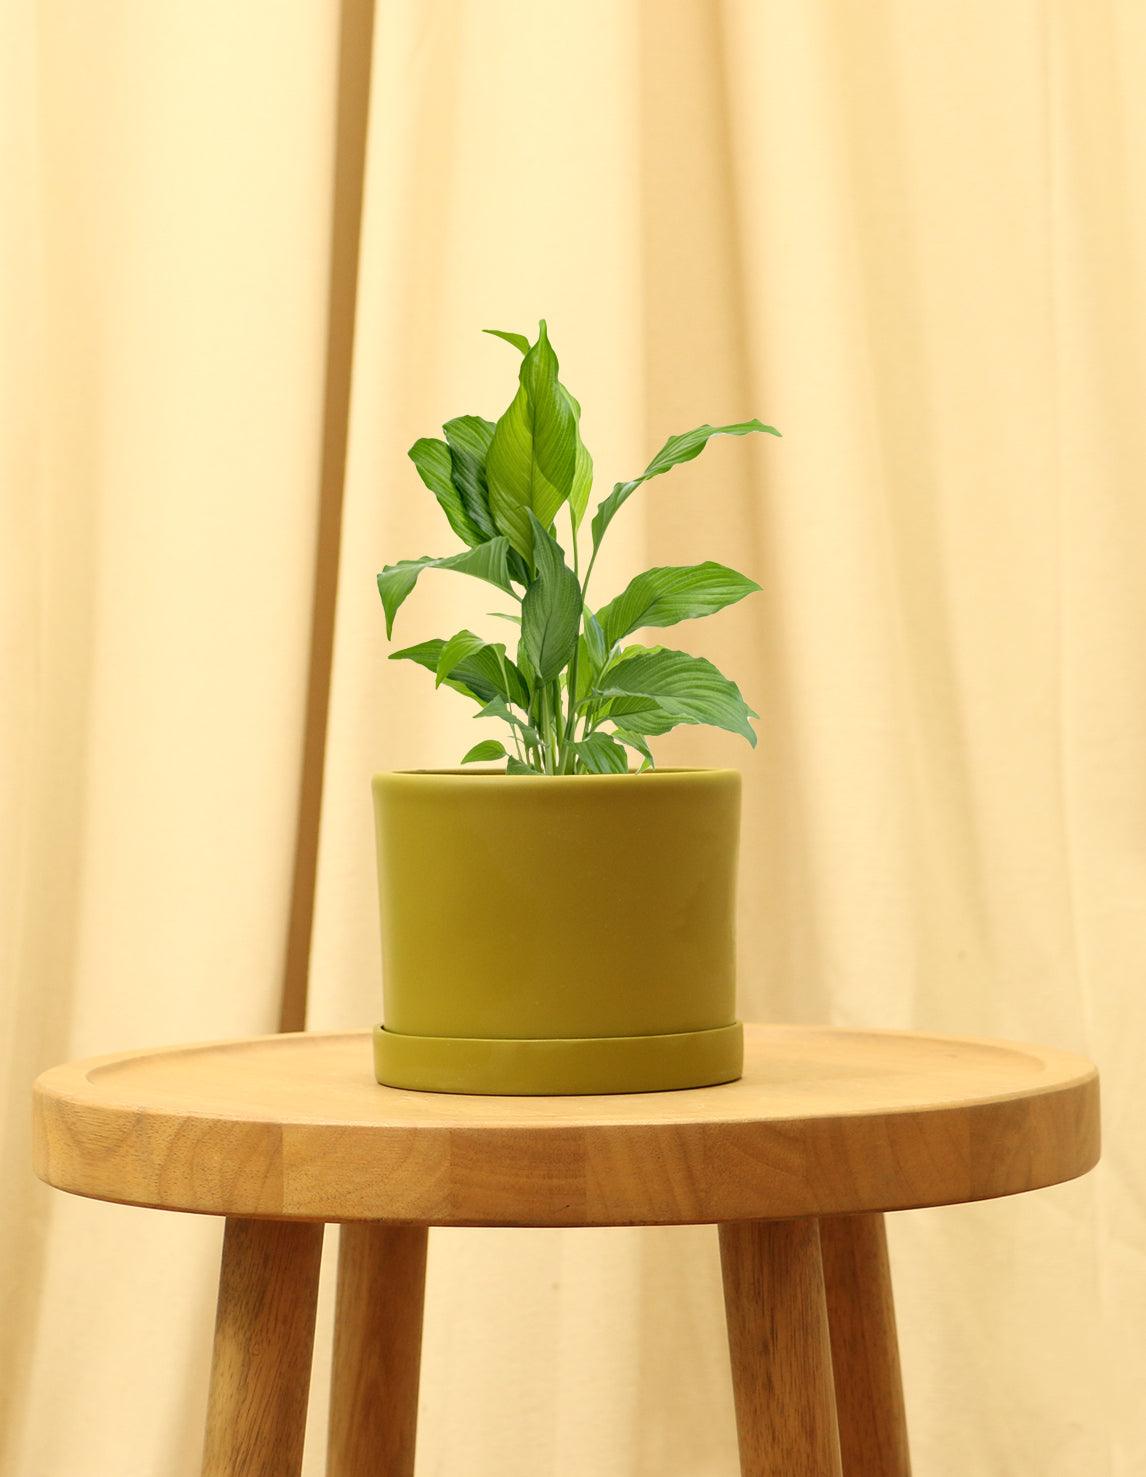 Small Peace Lily in green pot.